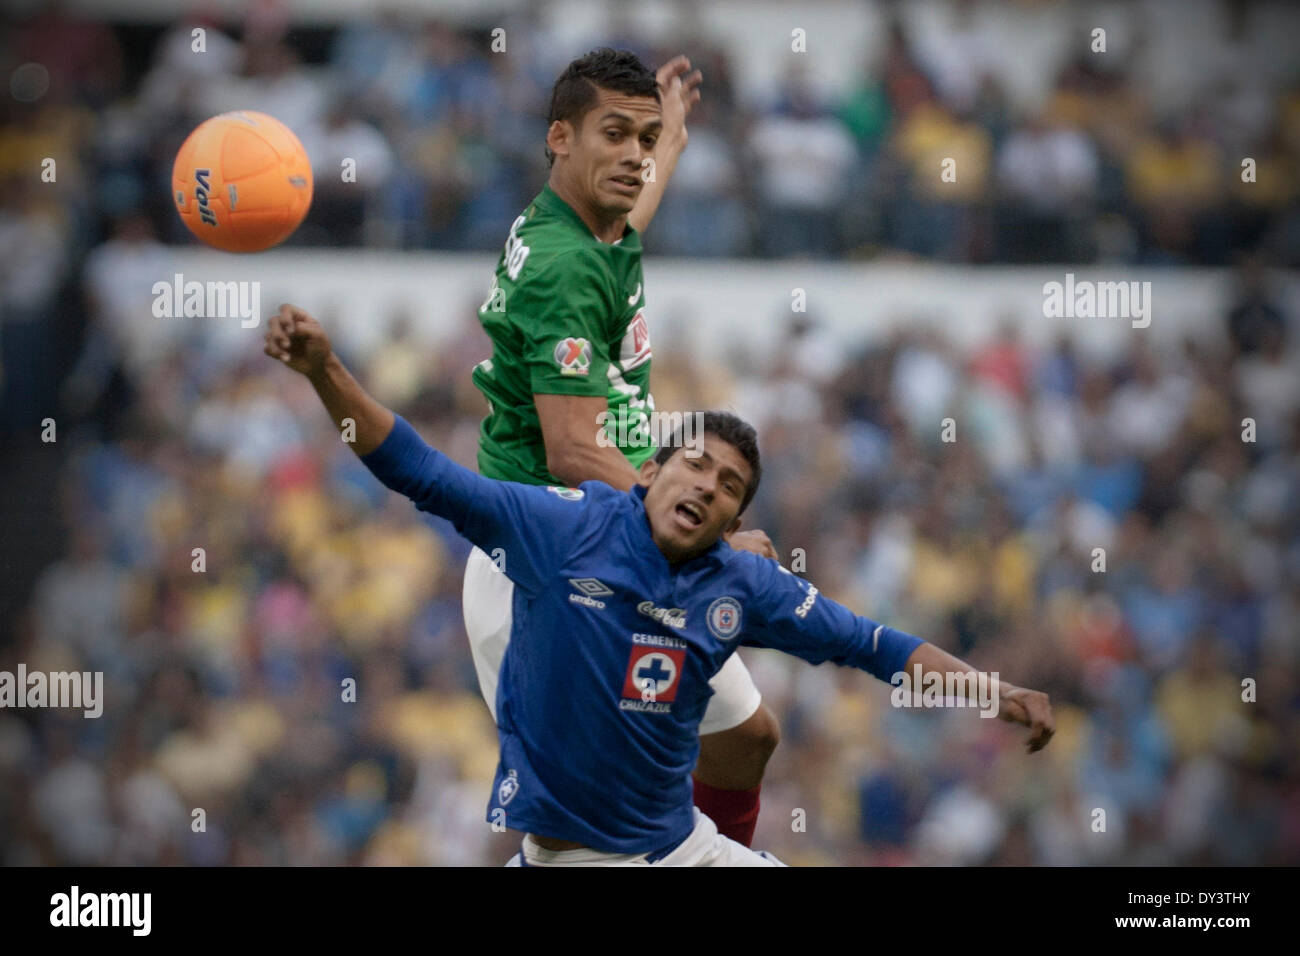 Mexico City, Mexico. 5th Apr, 2014. America's Andres Andrade (Rear) vies for the ball with Joao Rojas of Cruz Azul during the match of the Liga MX in the Azteca Stadium in Mexico City, capital of Mexico, on April 5, 2014. © Alejandro Ayala/Xinhua/Alamy Live News Stock Photo